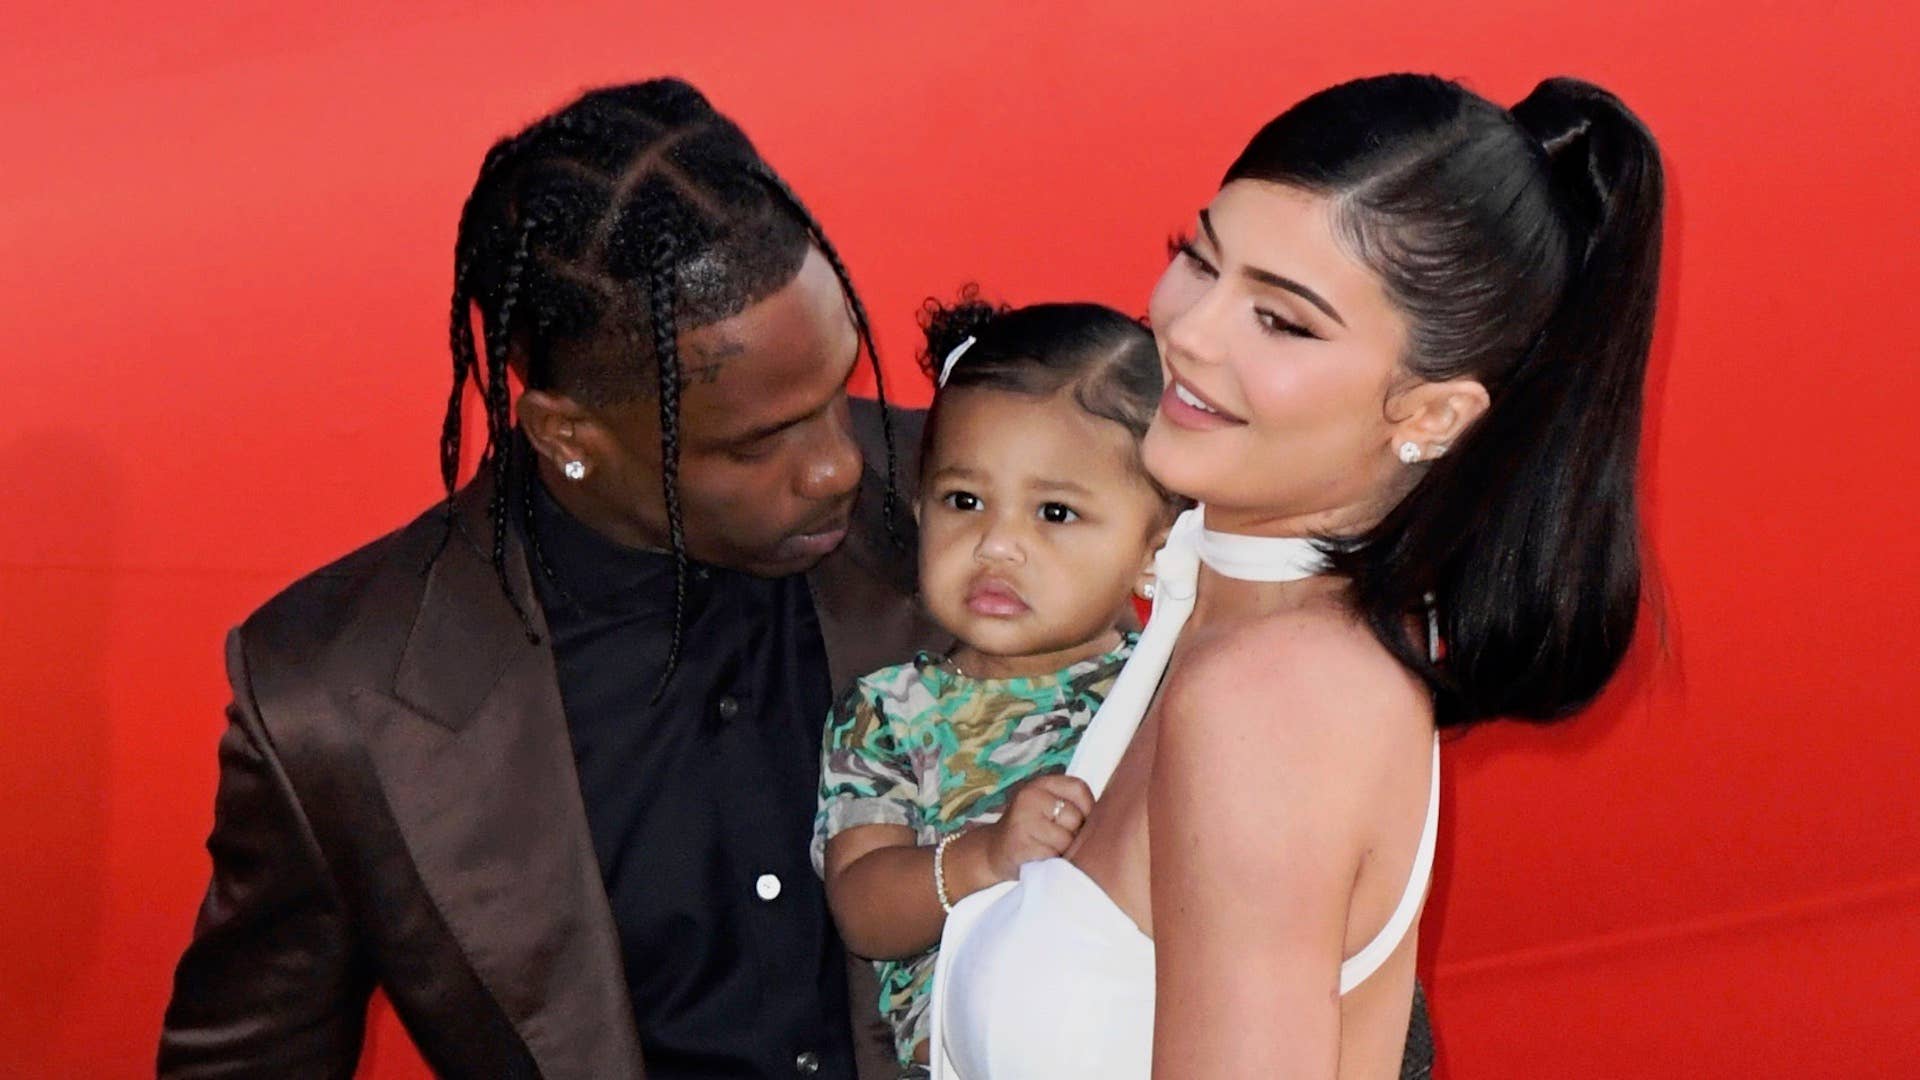 Kylie Jenner shares images of Stormi as her daughter turns one